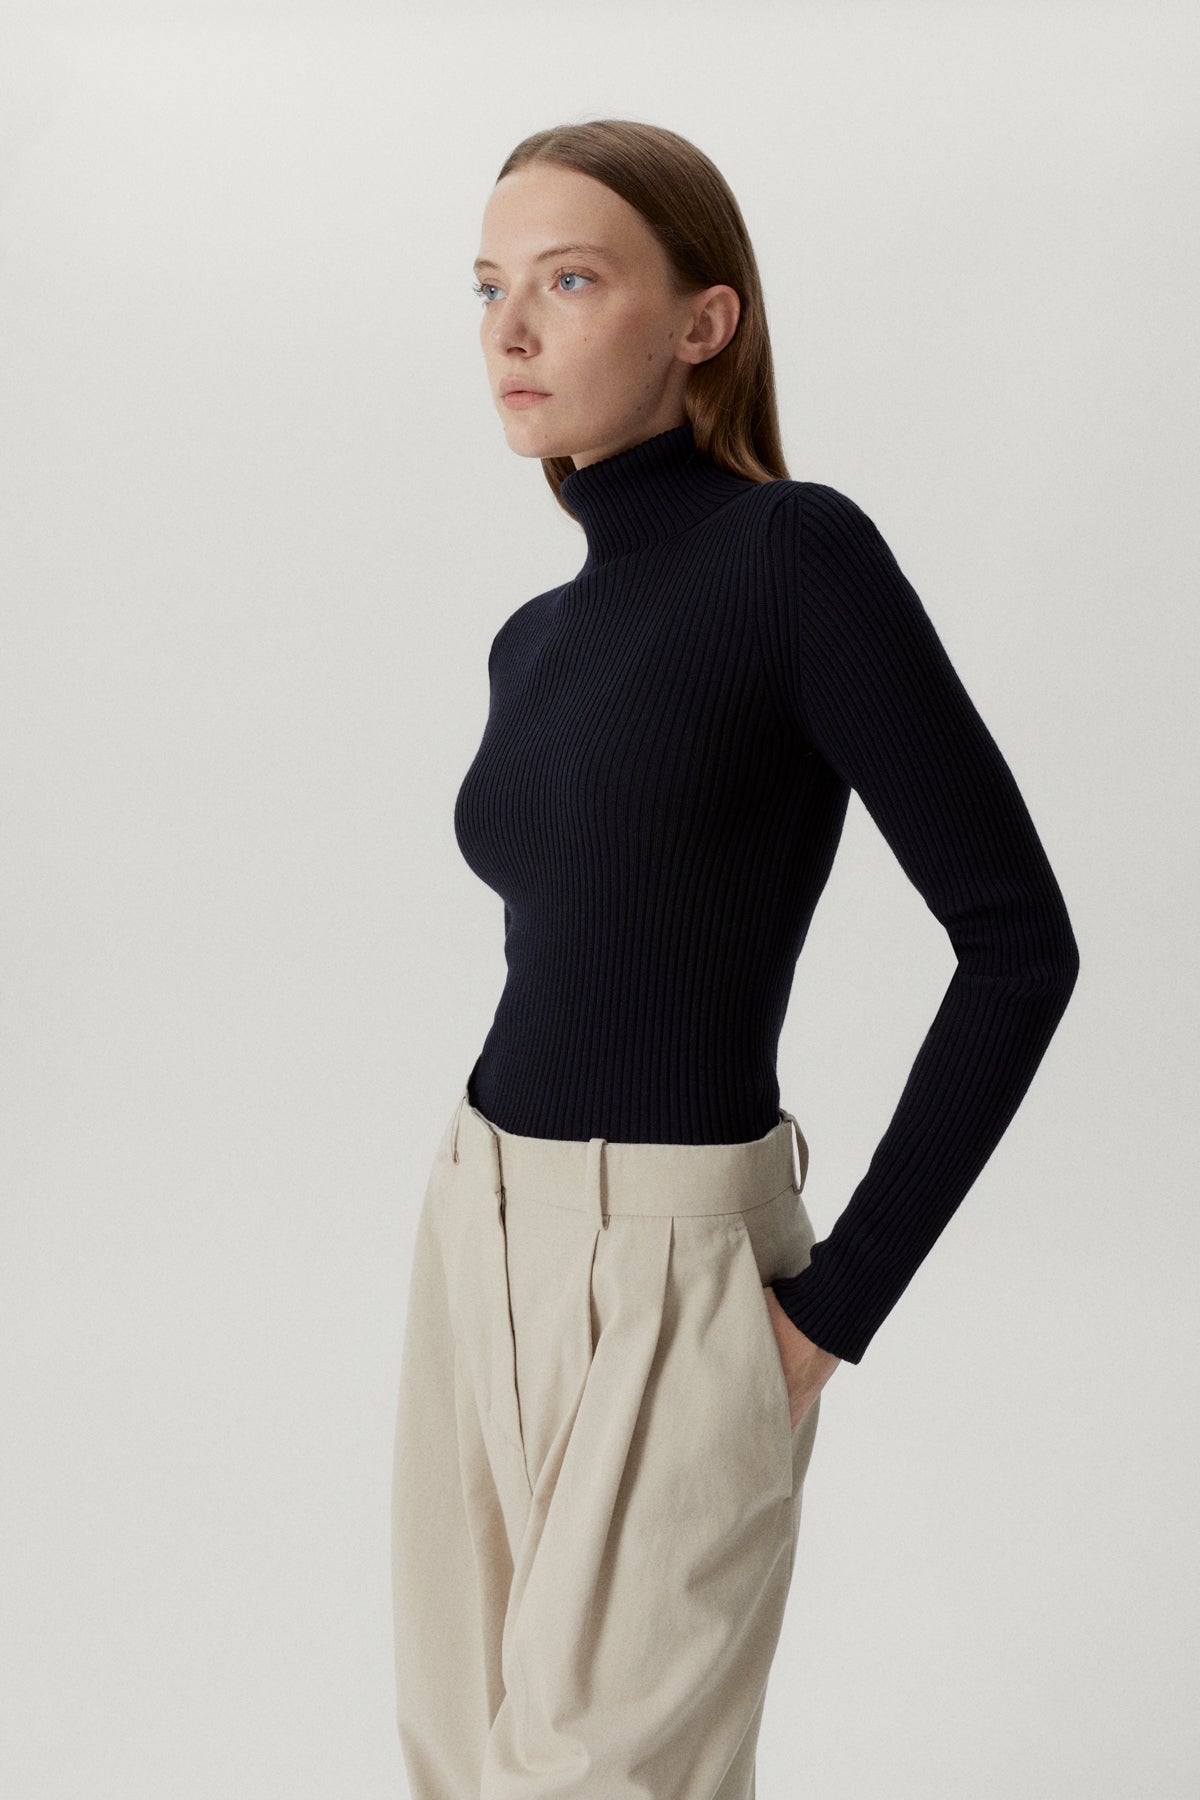 Oxford Blue | The Merino Wool Ribbed Roll neck